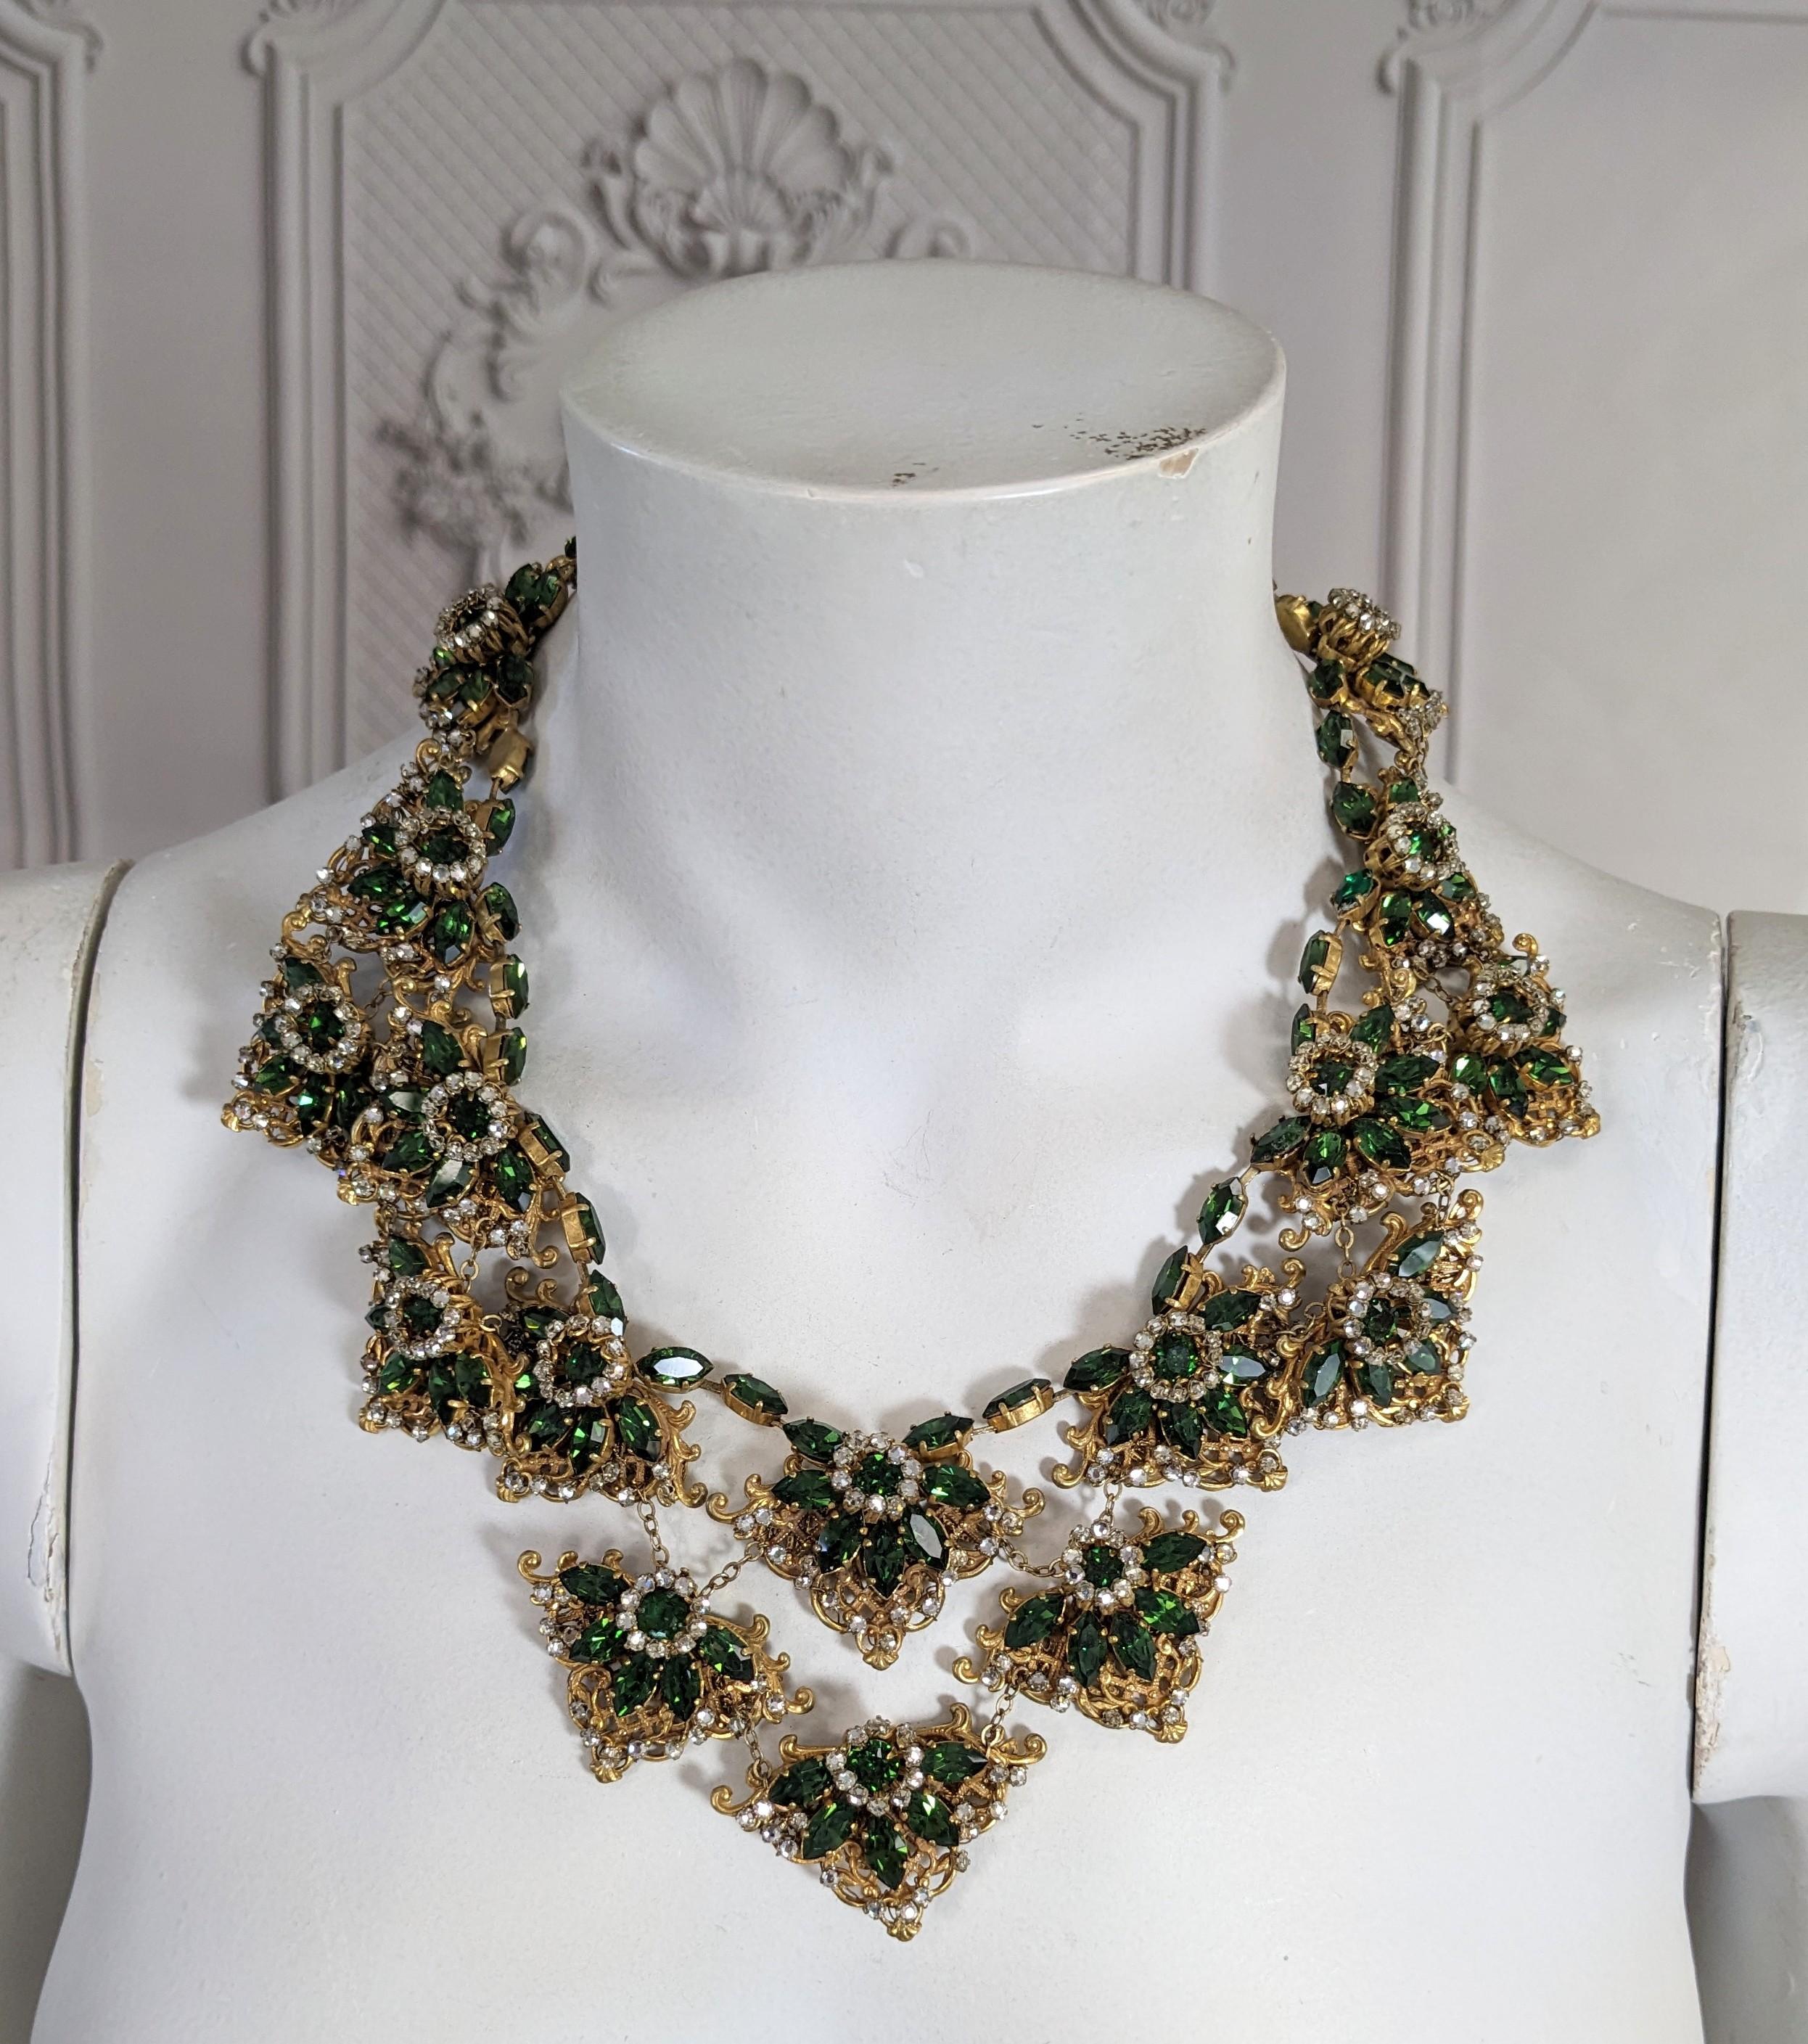 Massive Miriam Haskell Bib of Olivine and Crystal Rose Montees For Sale 11